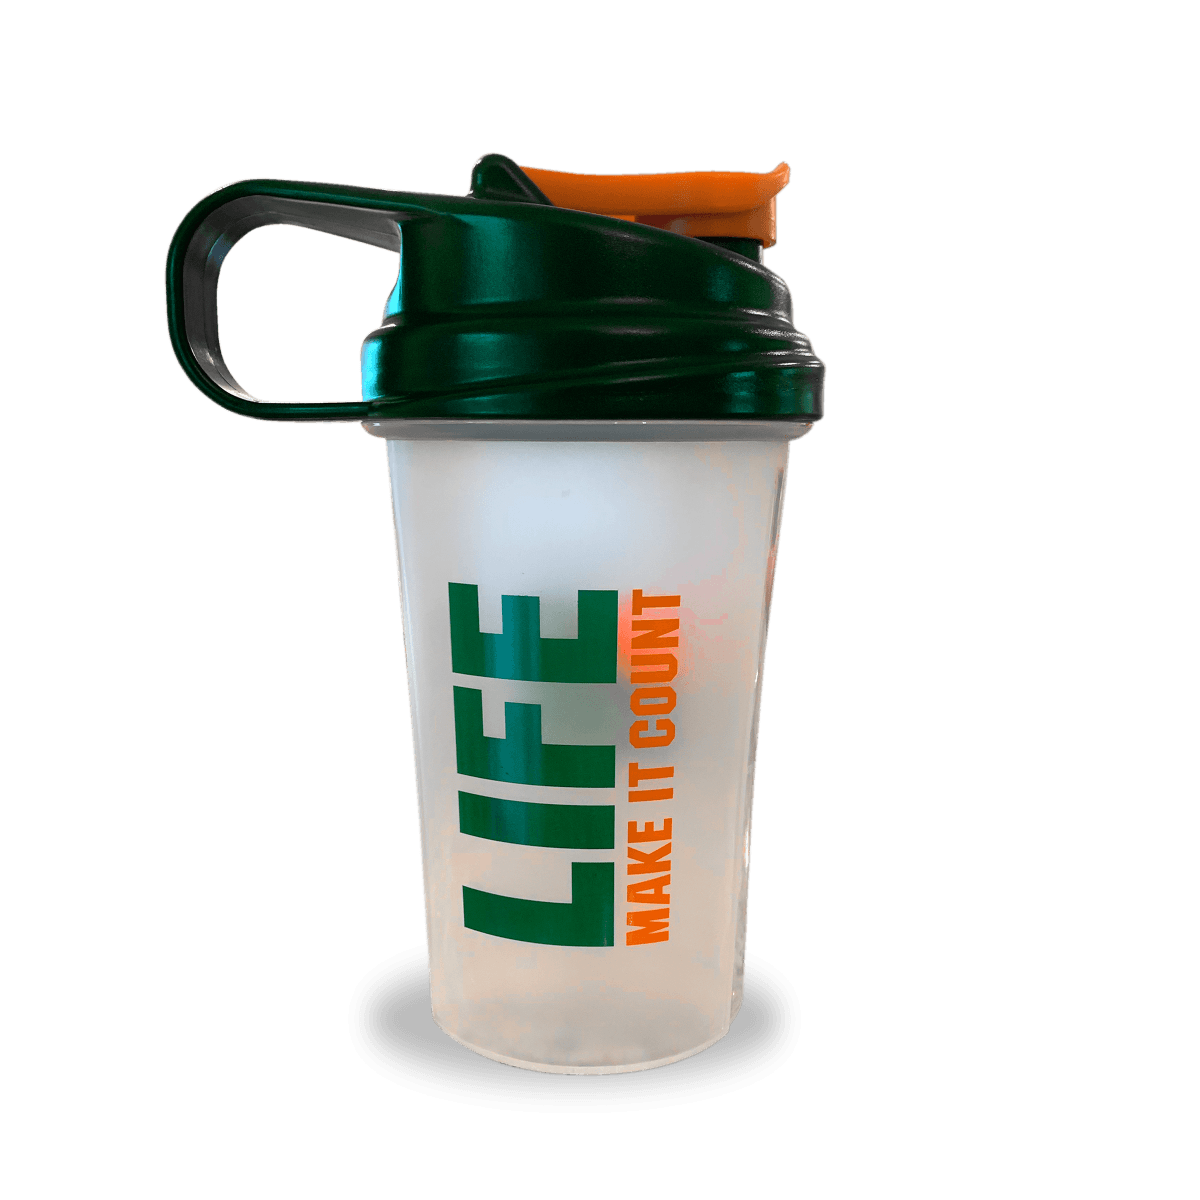 LIFE "Make it Count" Shaker -